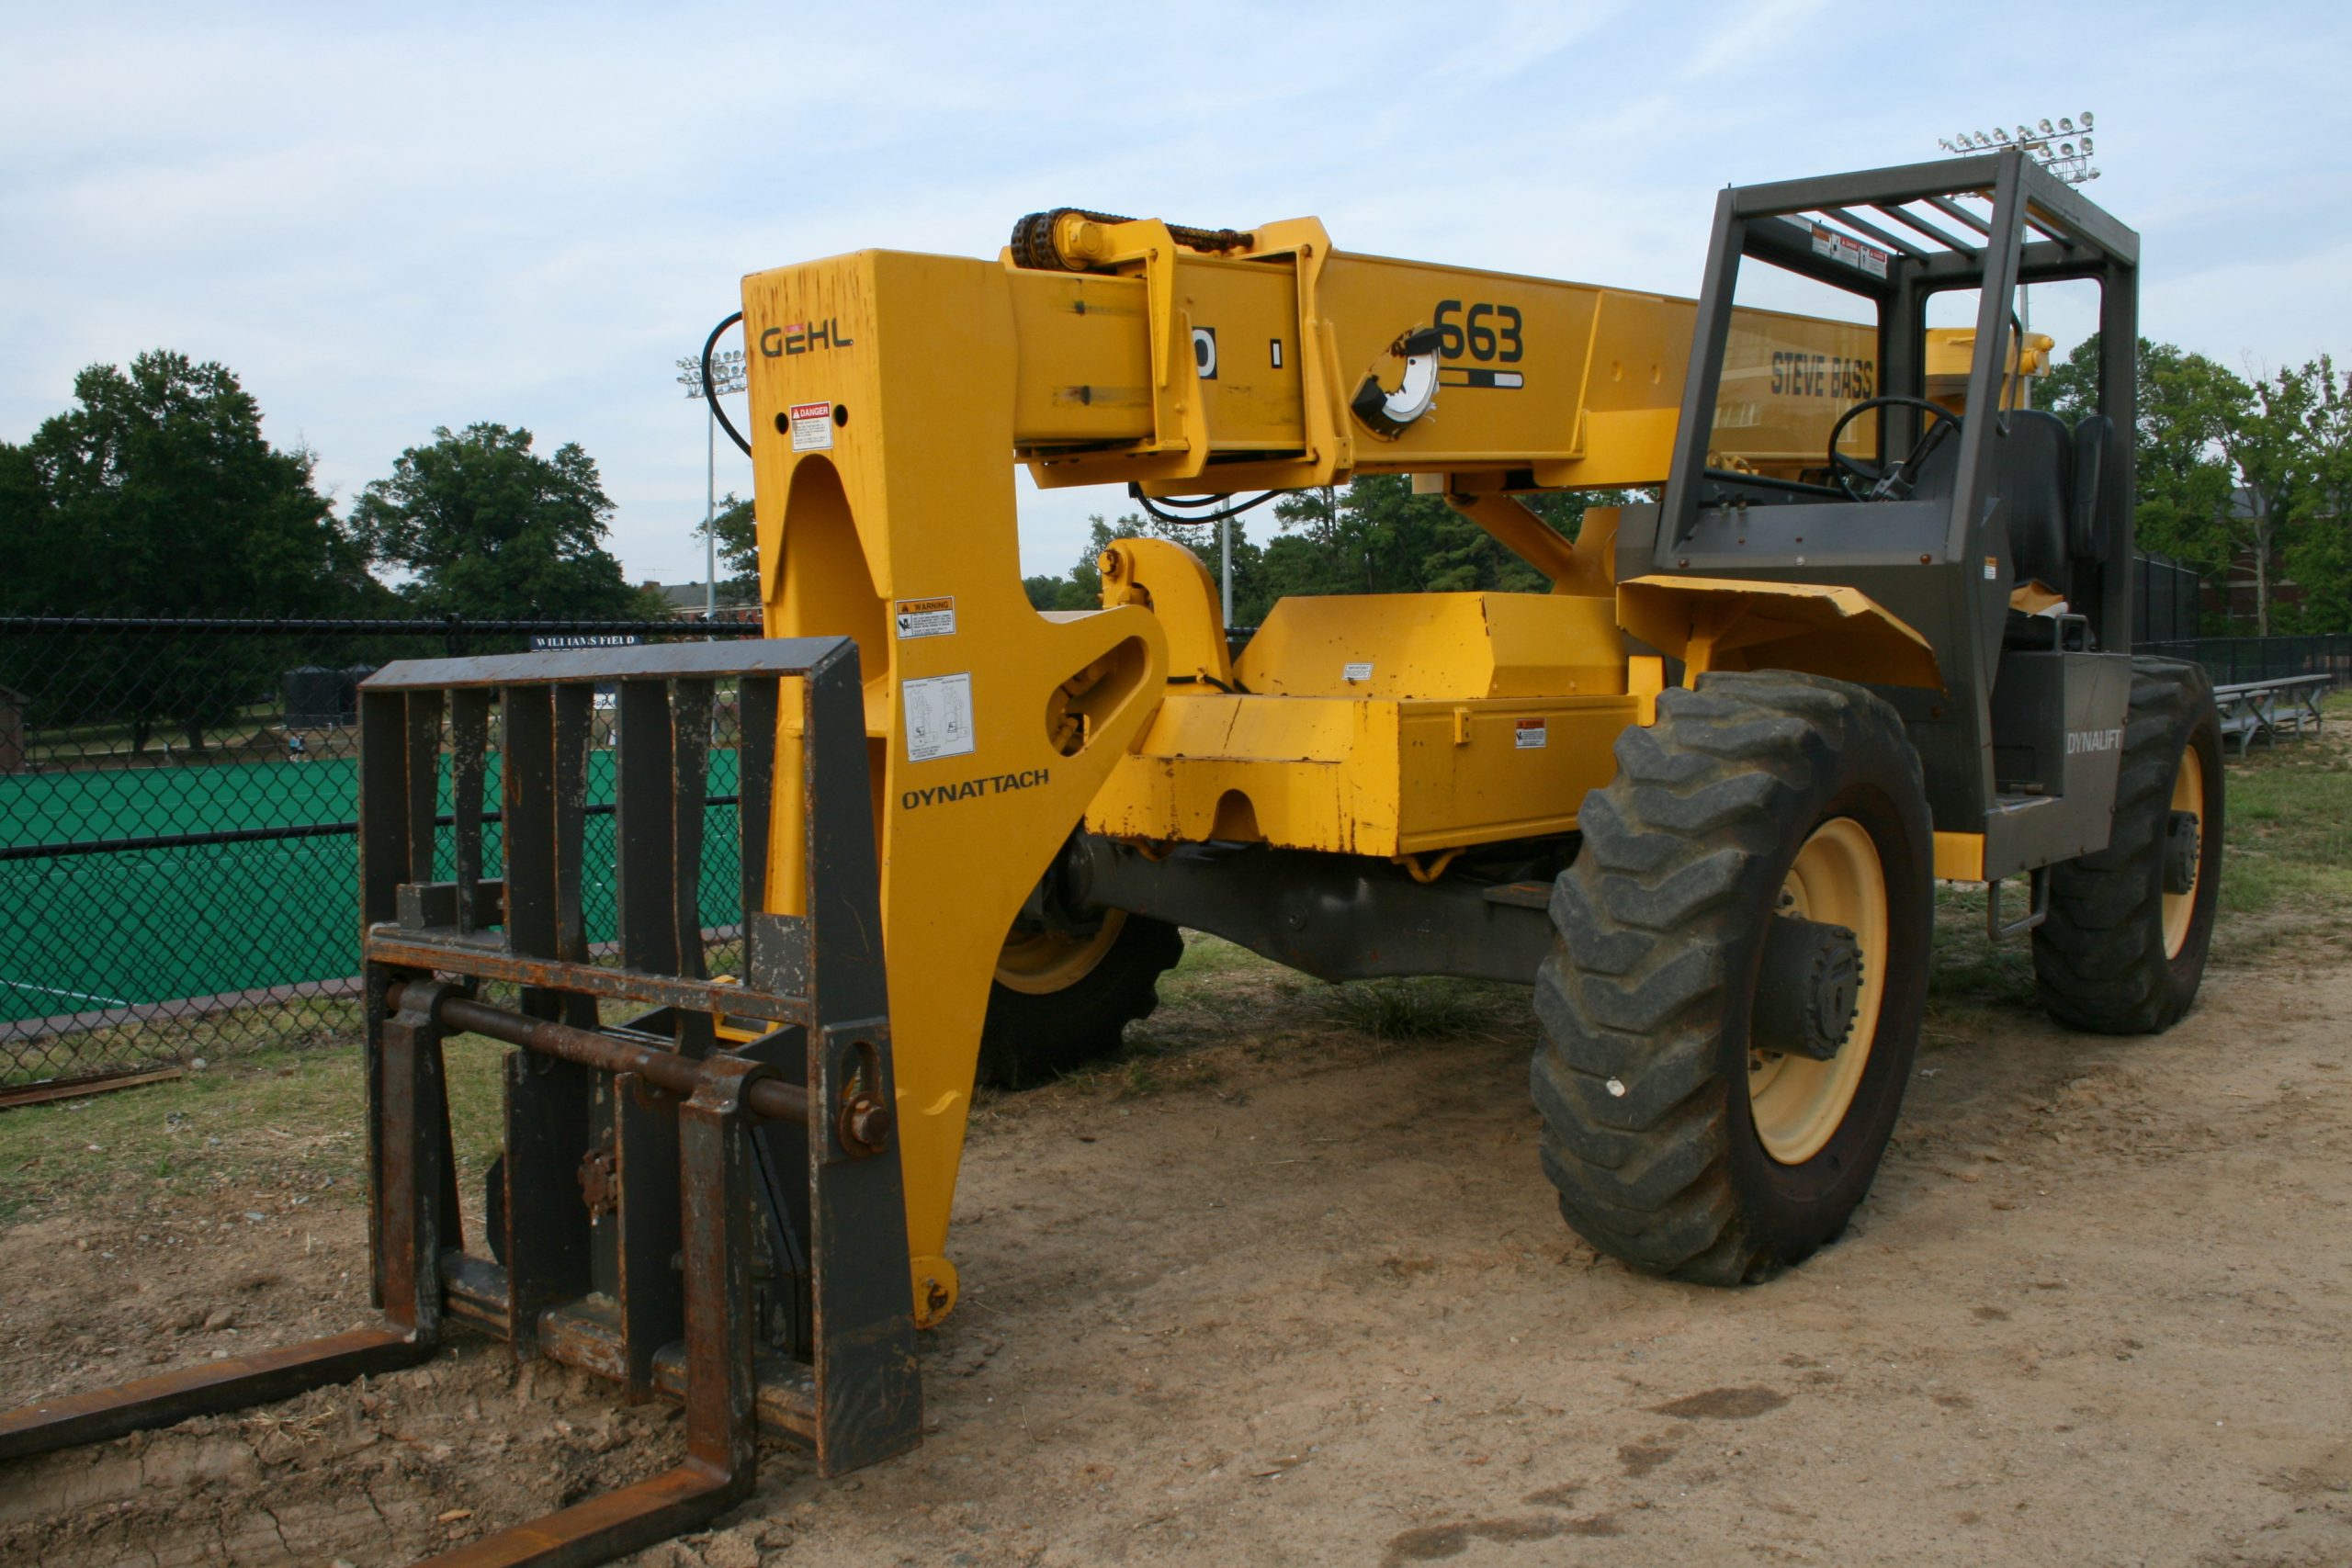 Image of Gehl Construction Machinery at a construction site